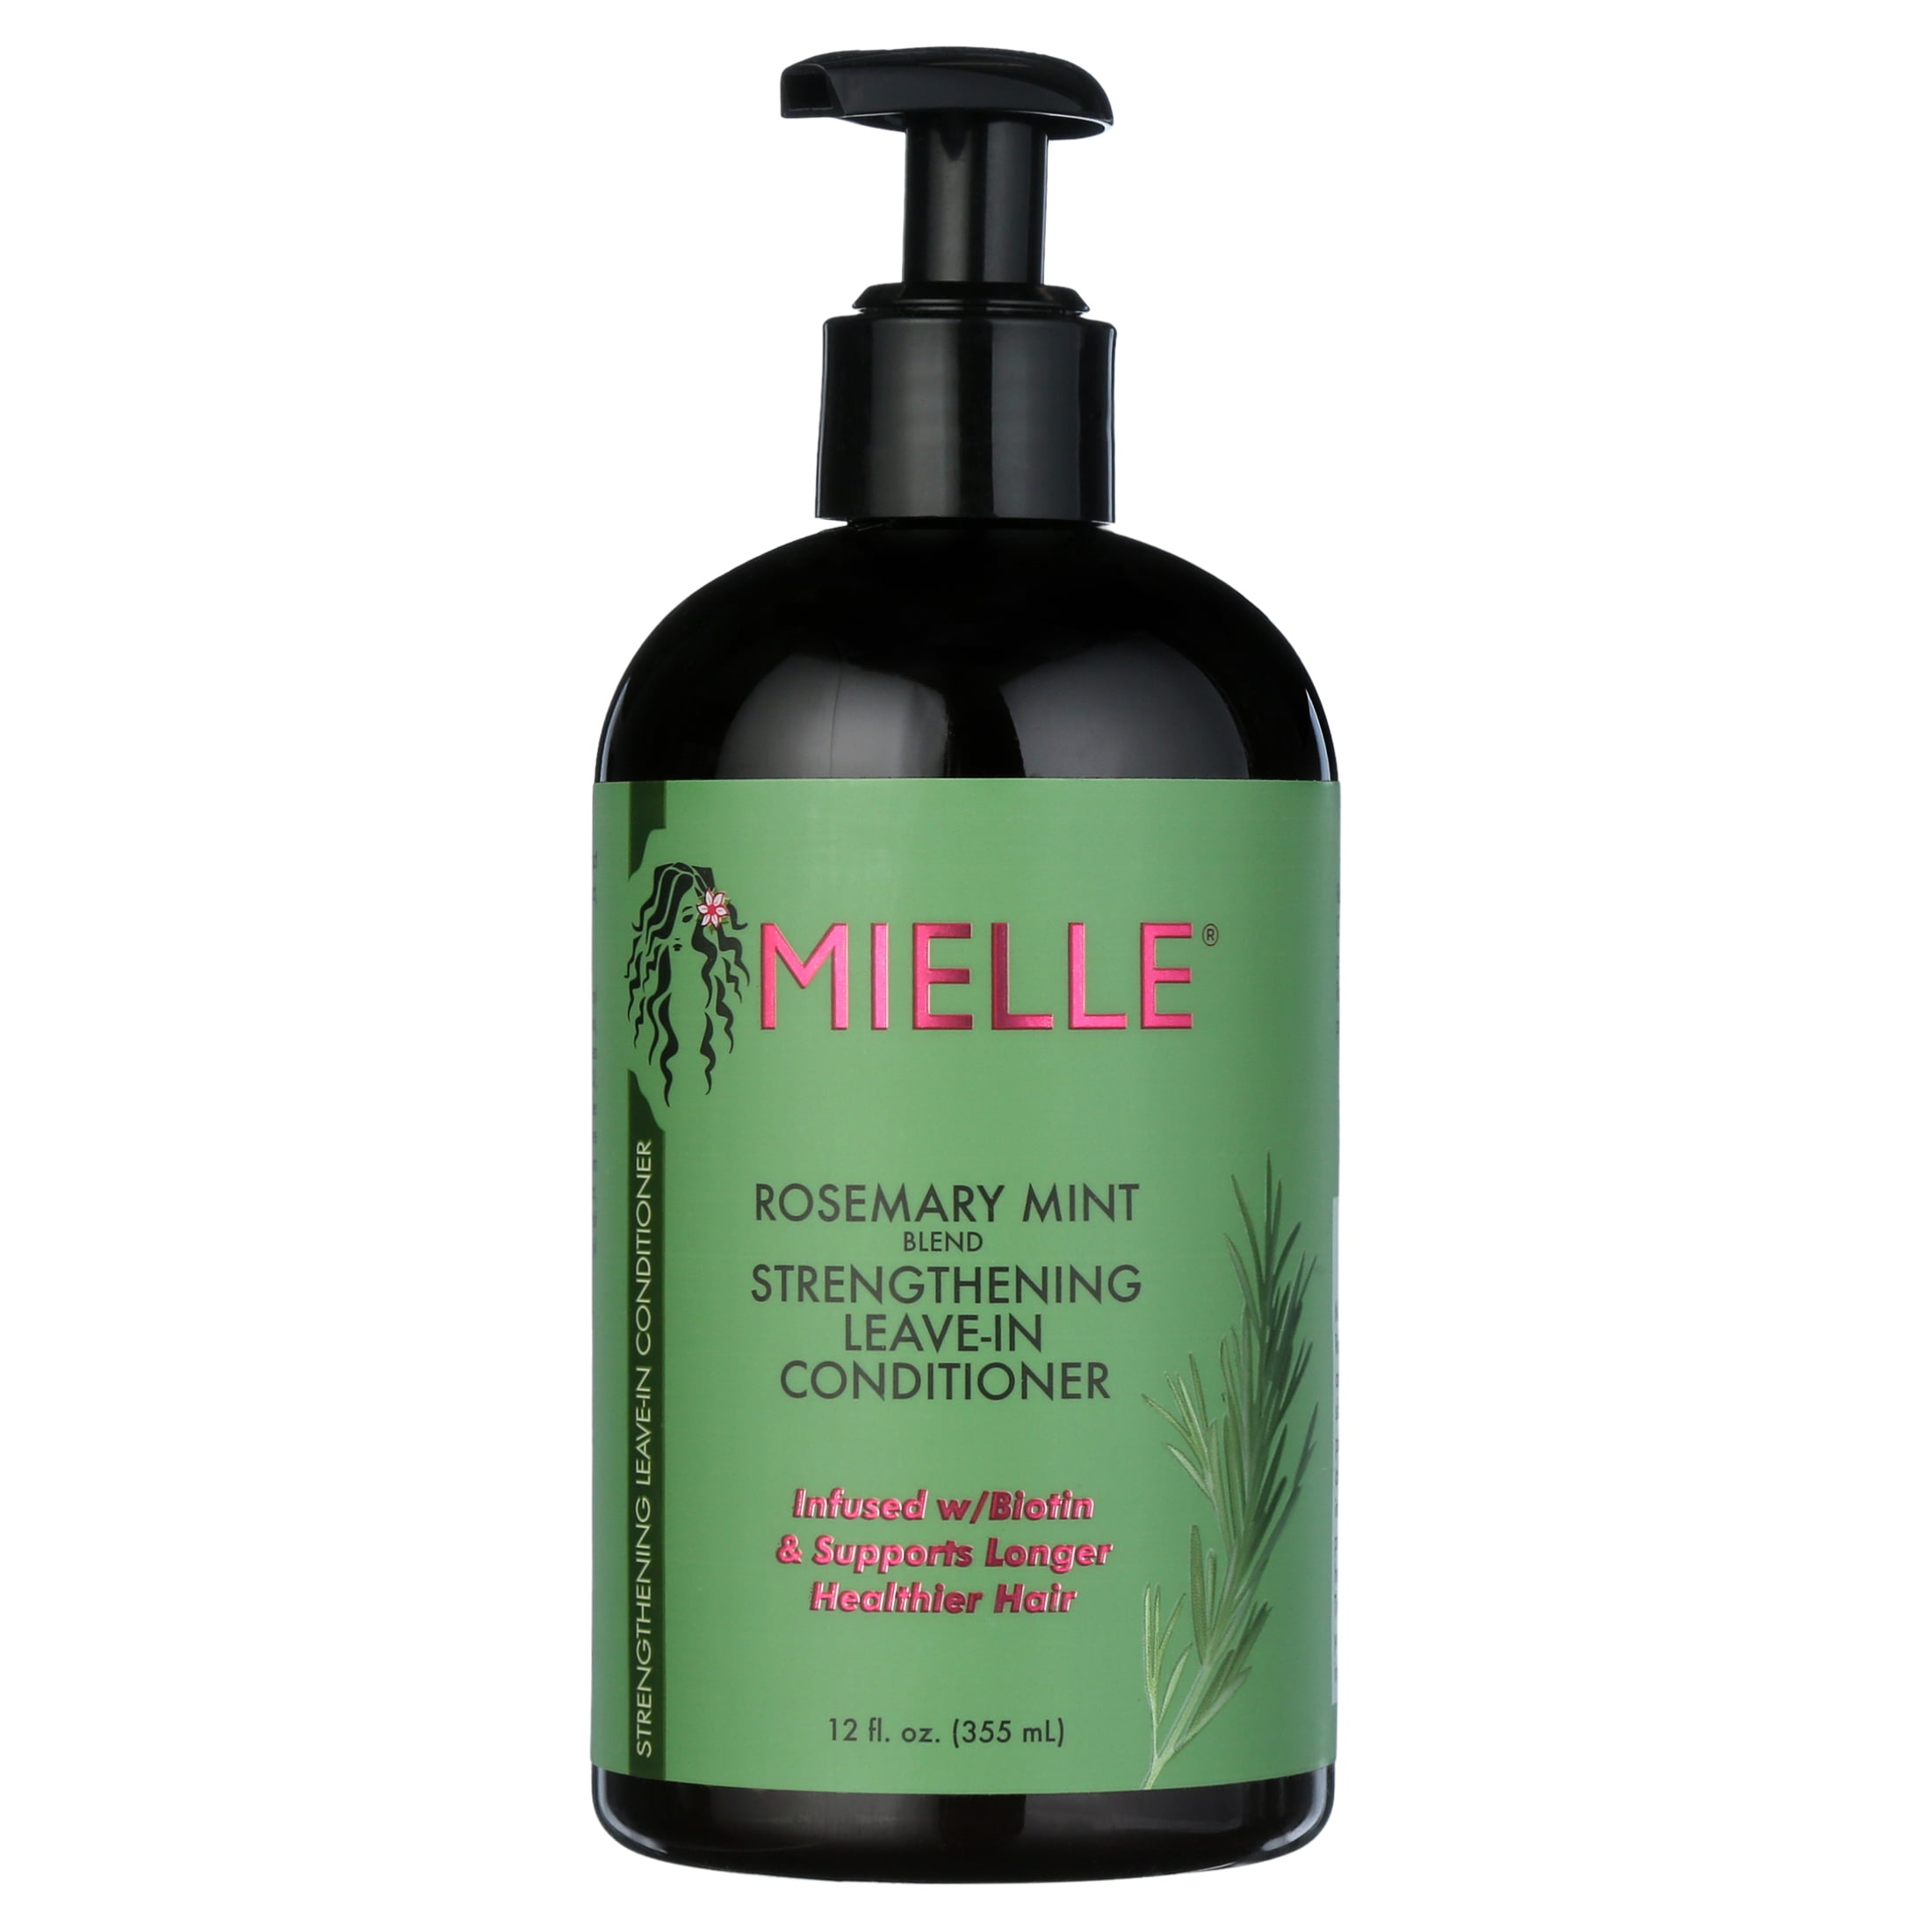 Mielle ROSEMARY MINT LEAVE-IN CONDITIONER 12 FL OZ